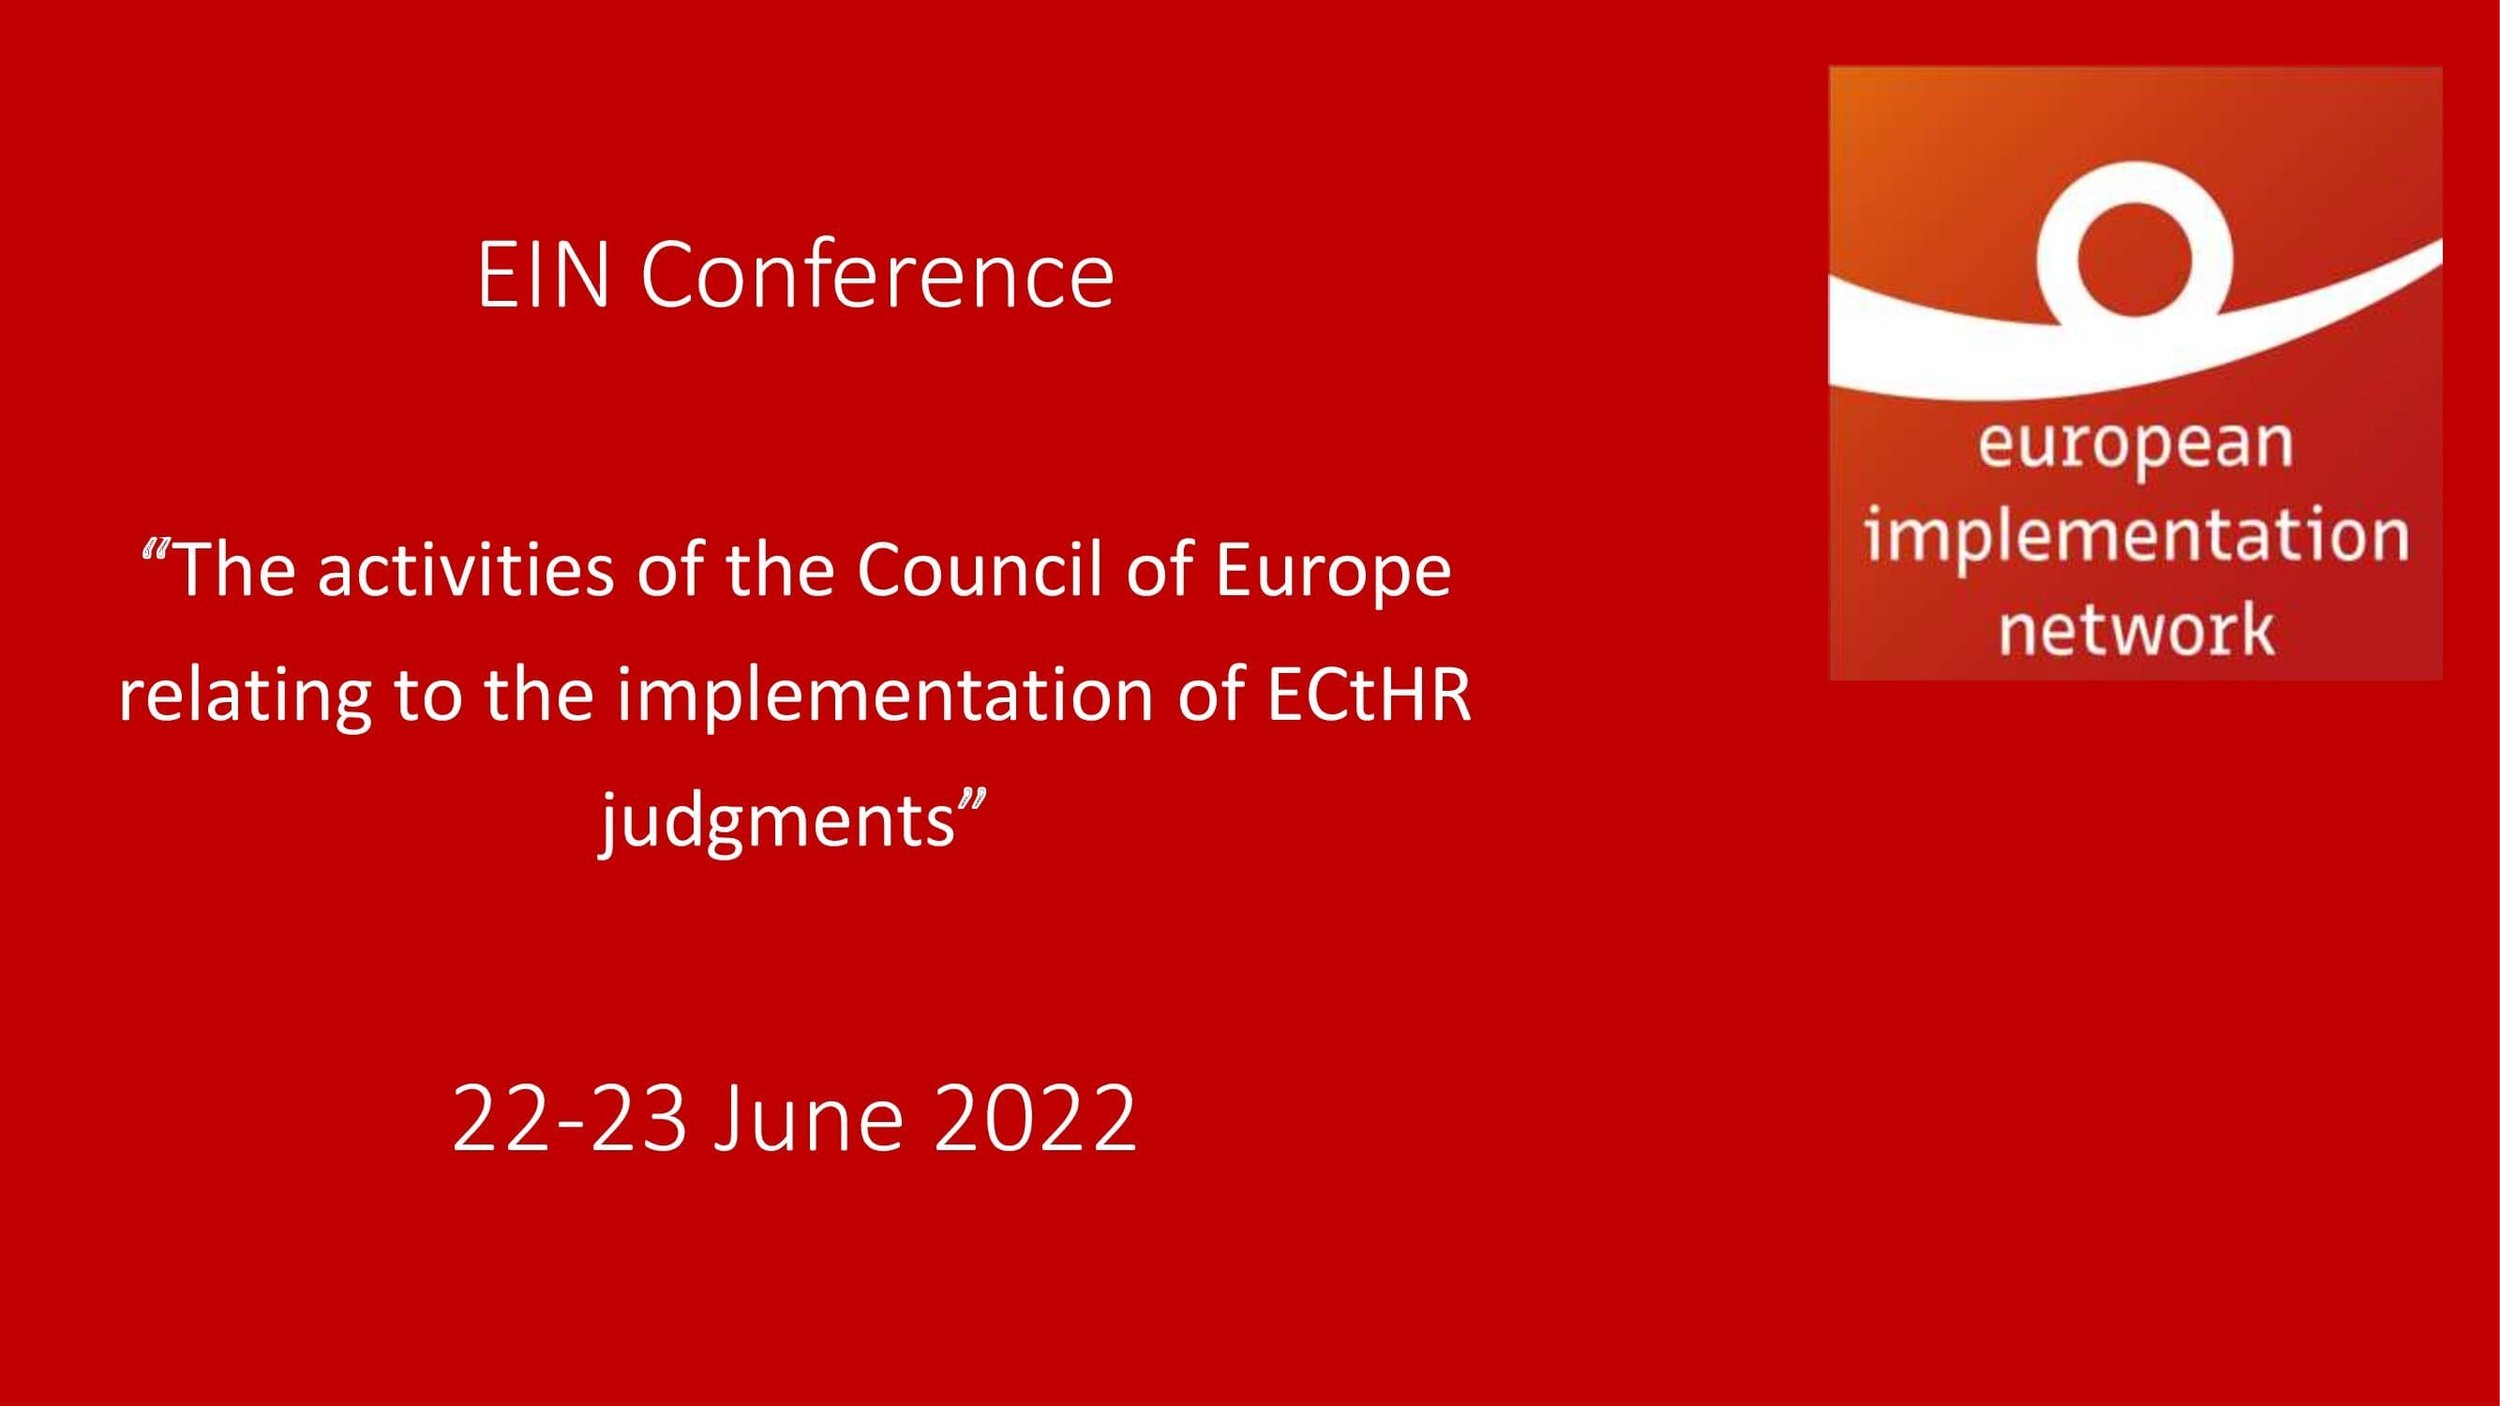 2022_06_The activities of the Council of Europe relating to the implementation of ECtHR judgments_updated_00001.jpg